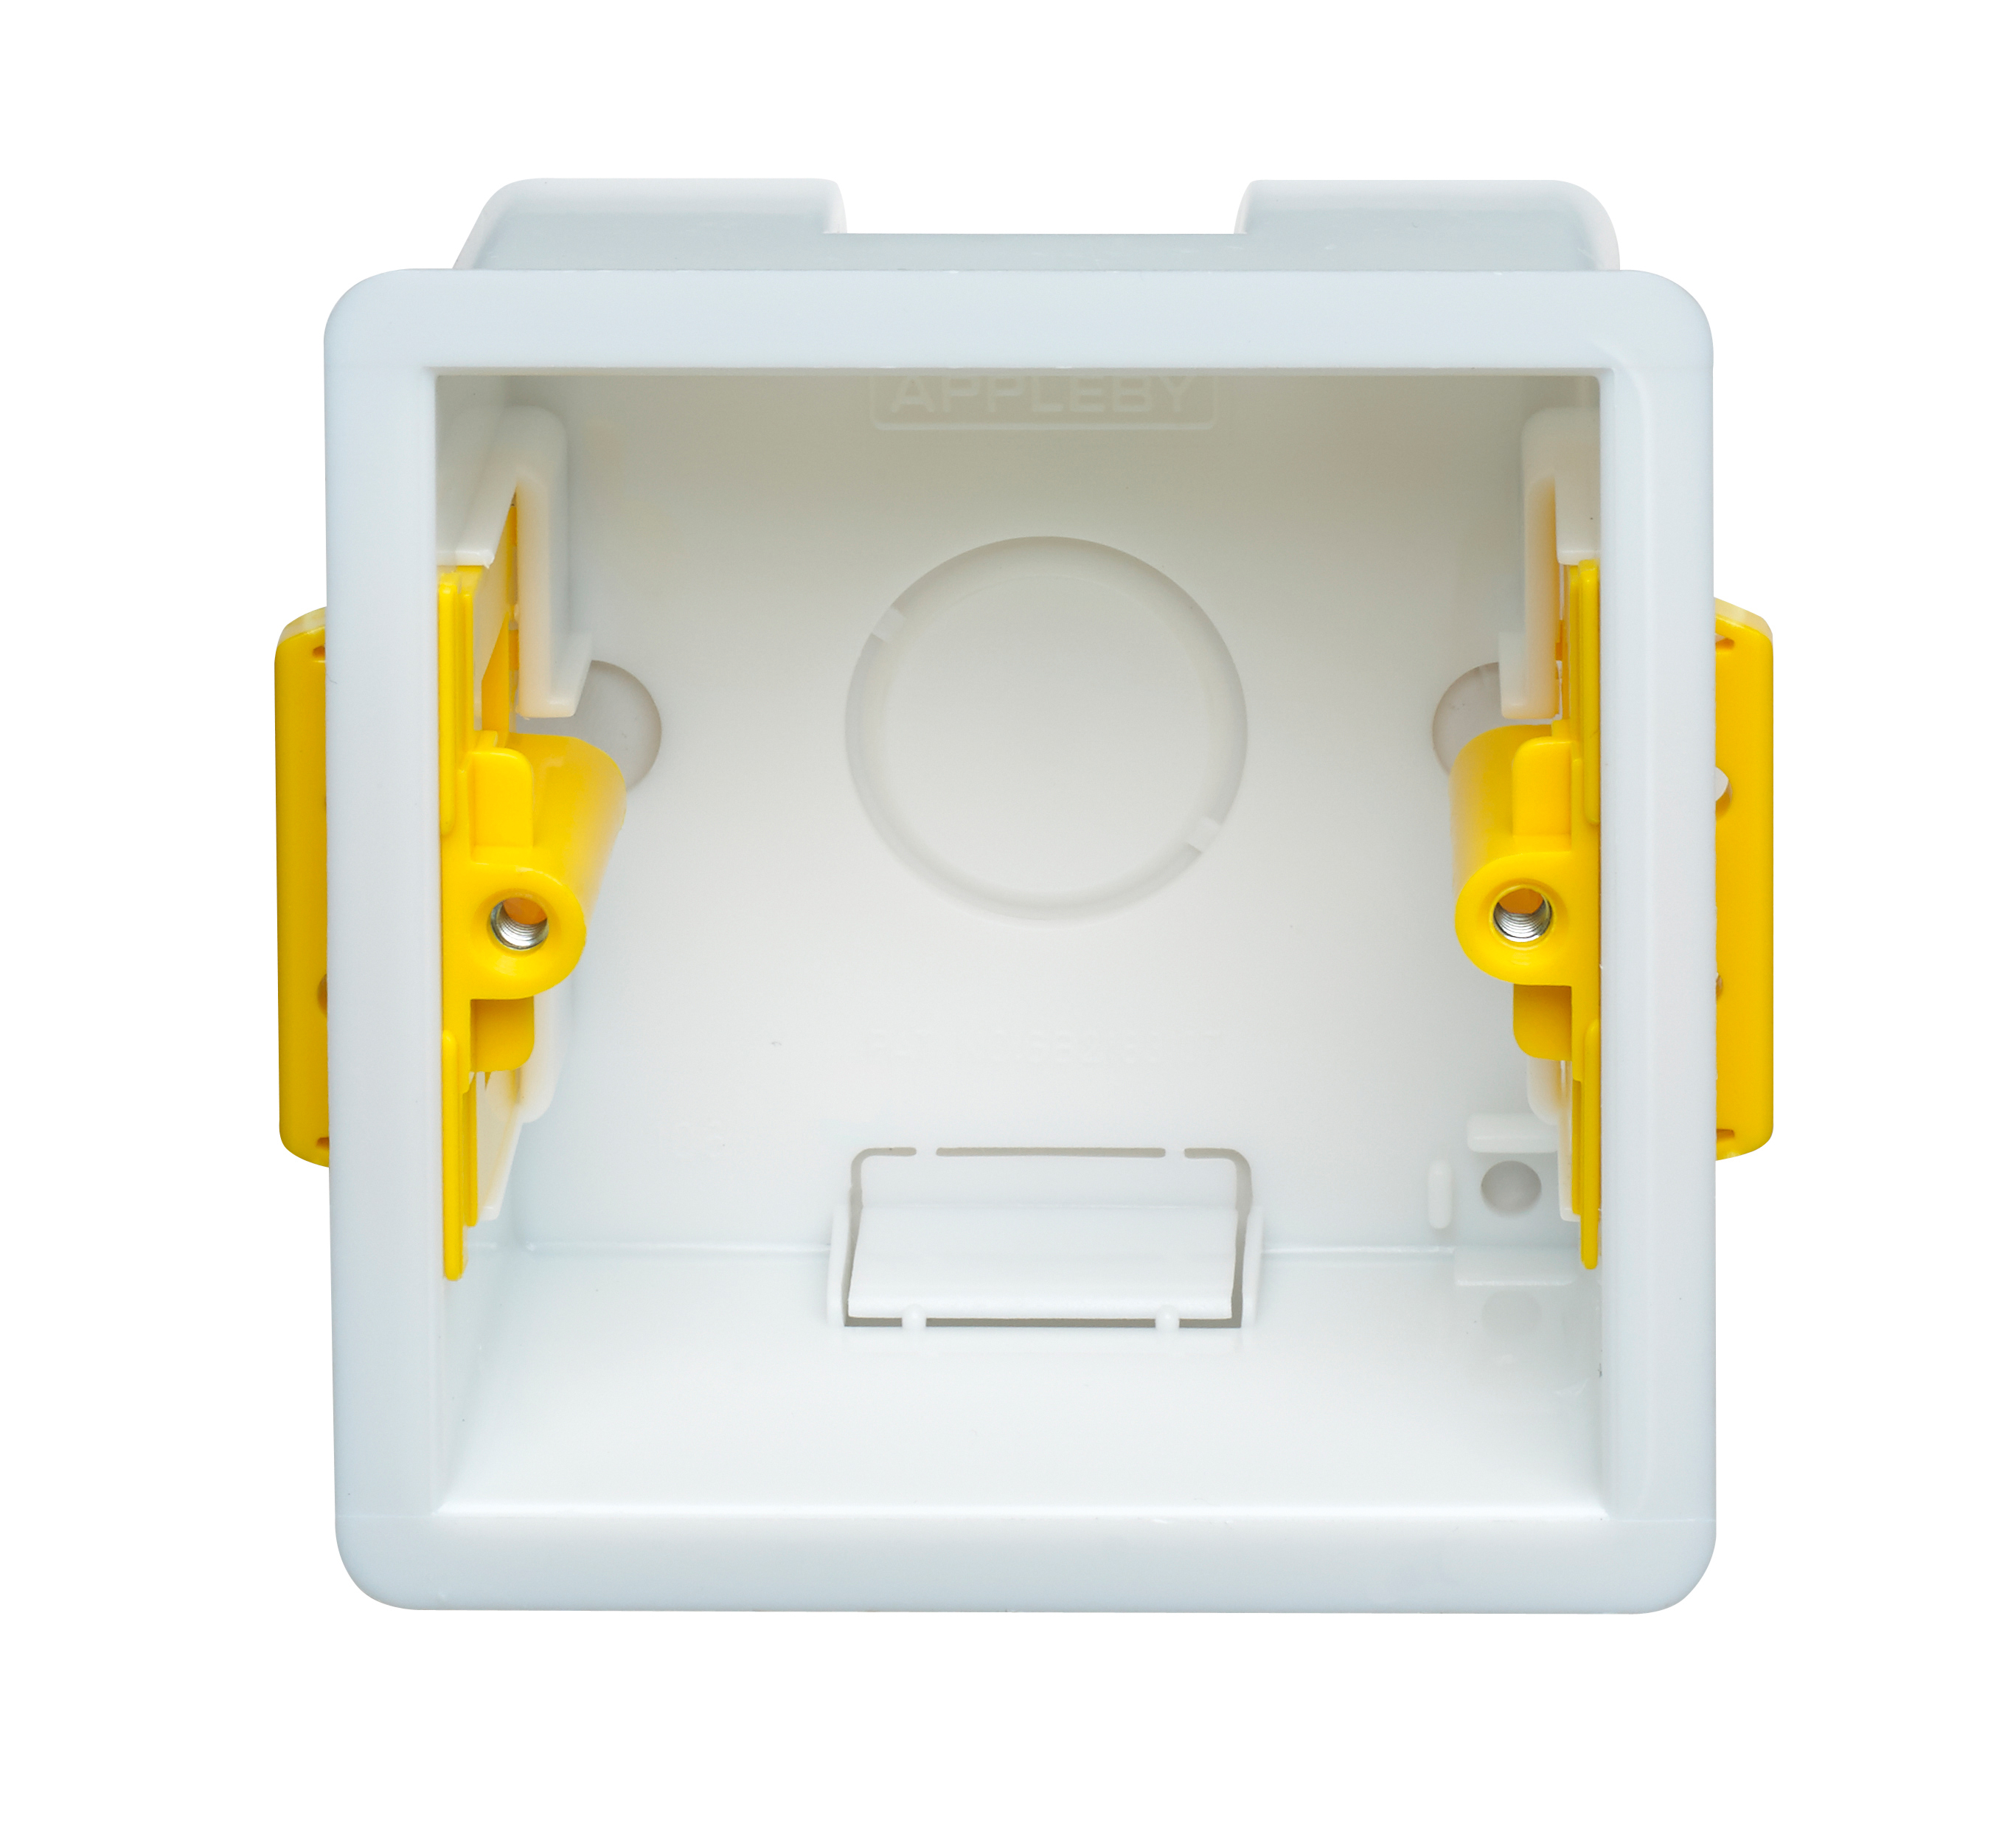 1G Dry Lining Installation Box with Adjustable Lugs 35mm